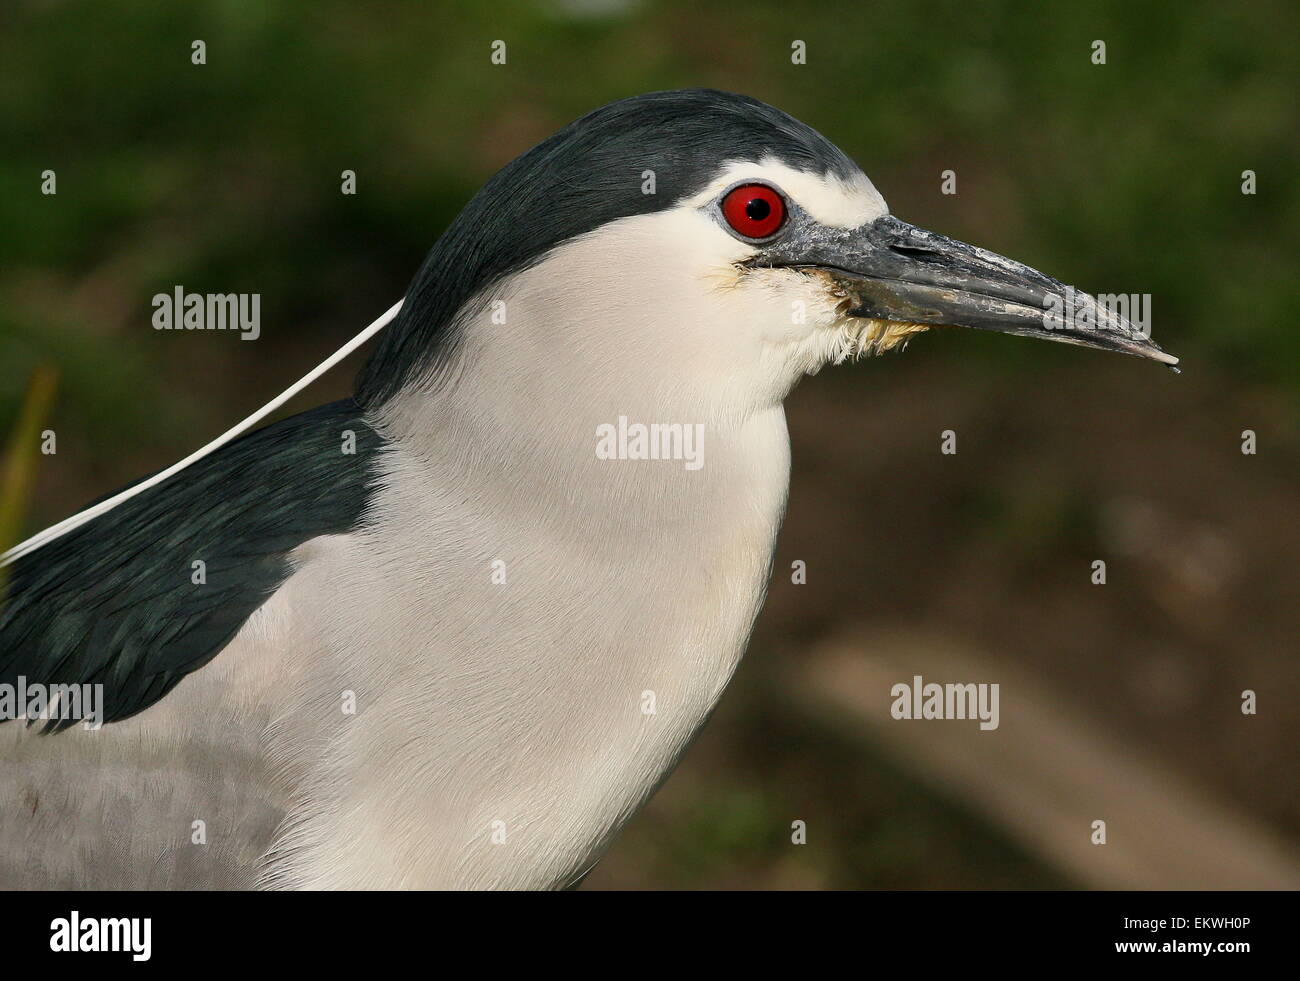 Black-crowned night heron (Nycticorax nycticorax) close-up of head and upper body Stock Photo